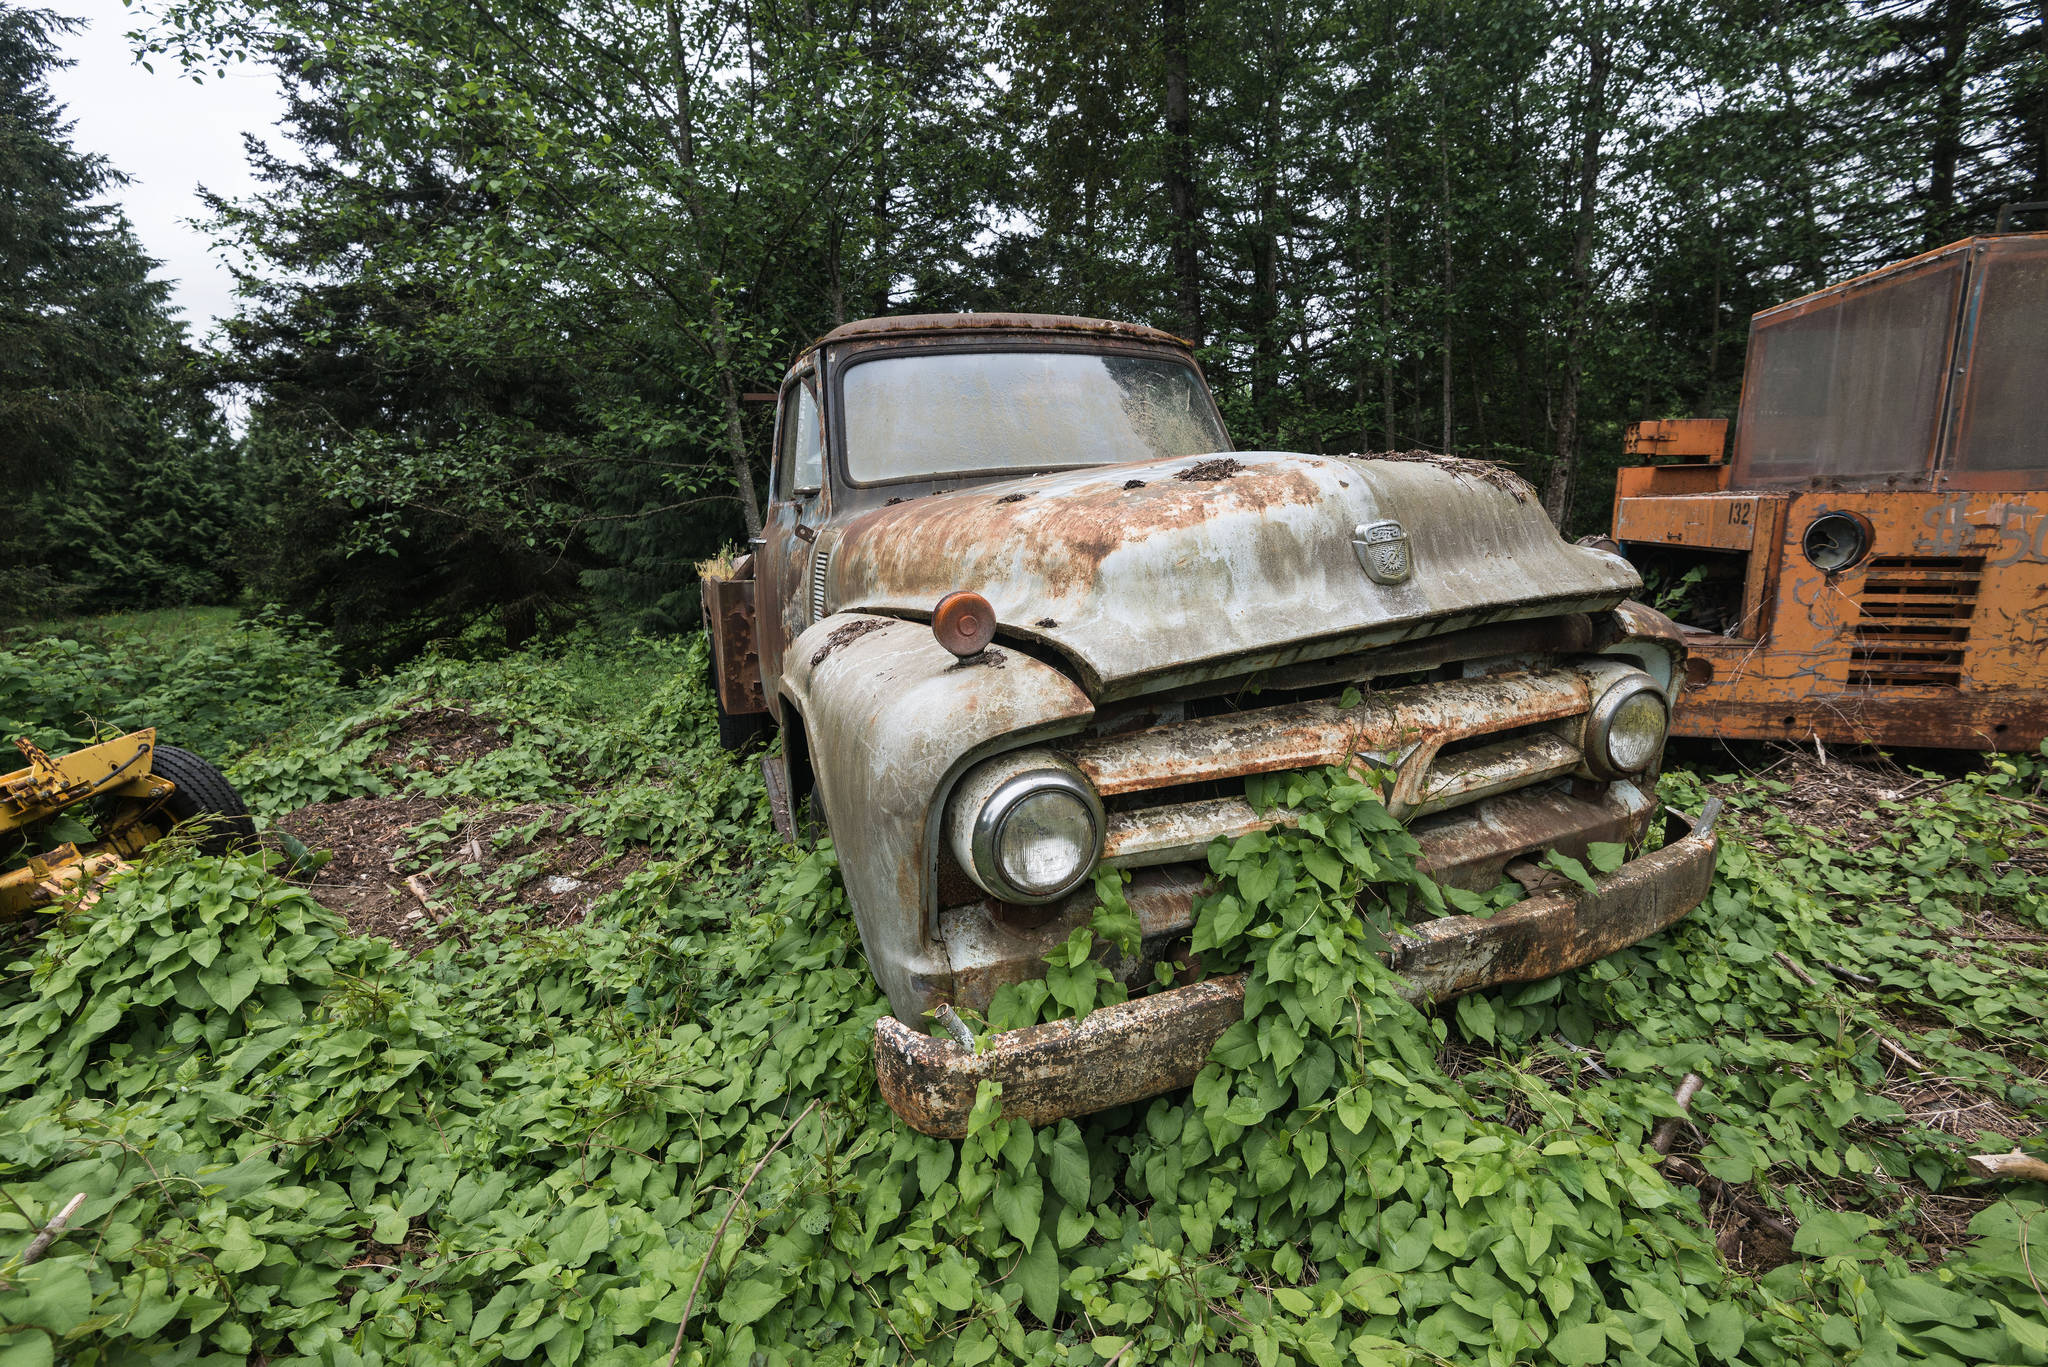 A rusting vintage truck finds it’s bed amongst the overgrowth at Pillon’s property. Photo by Caean Couto